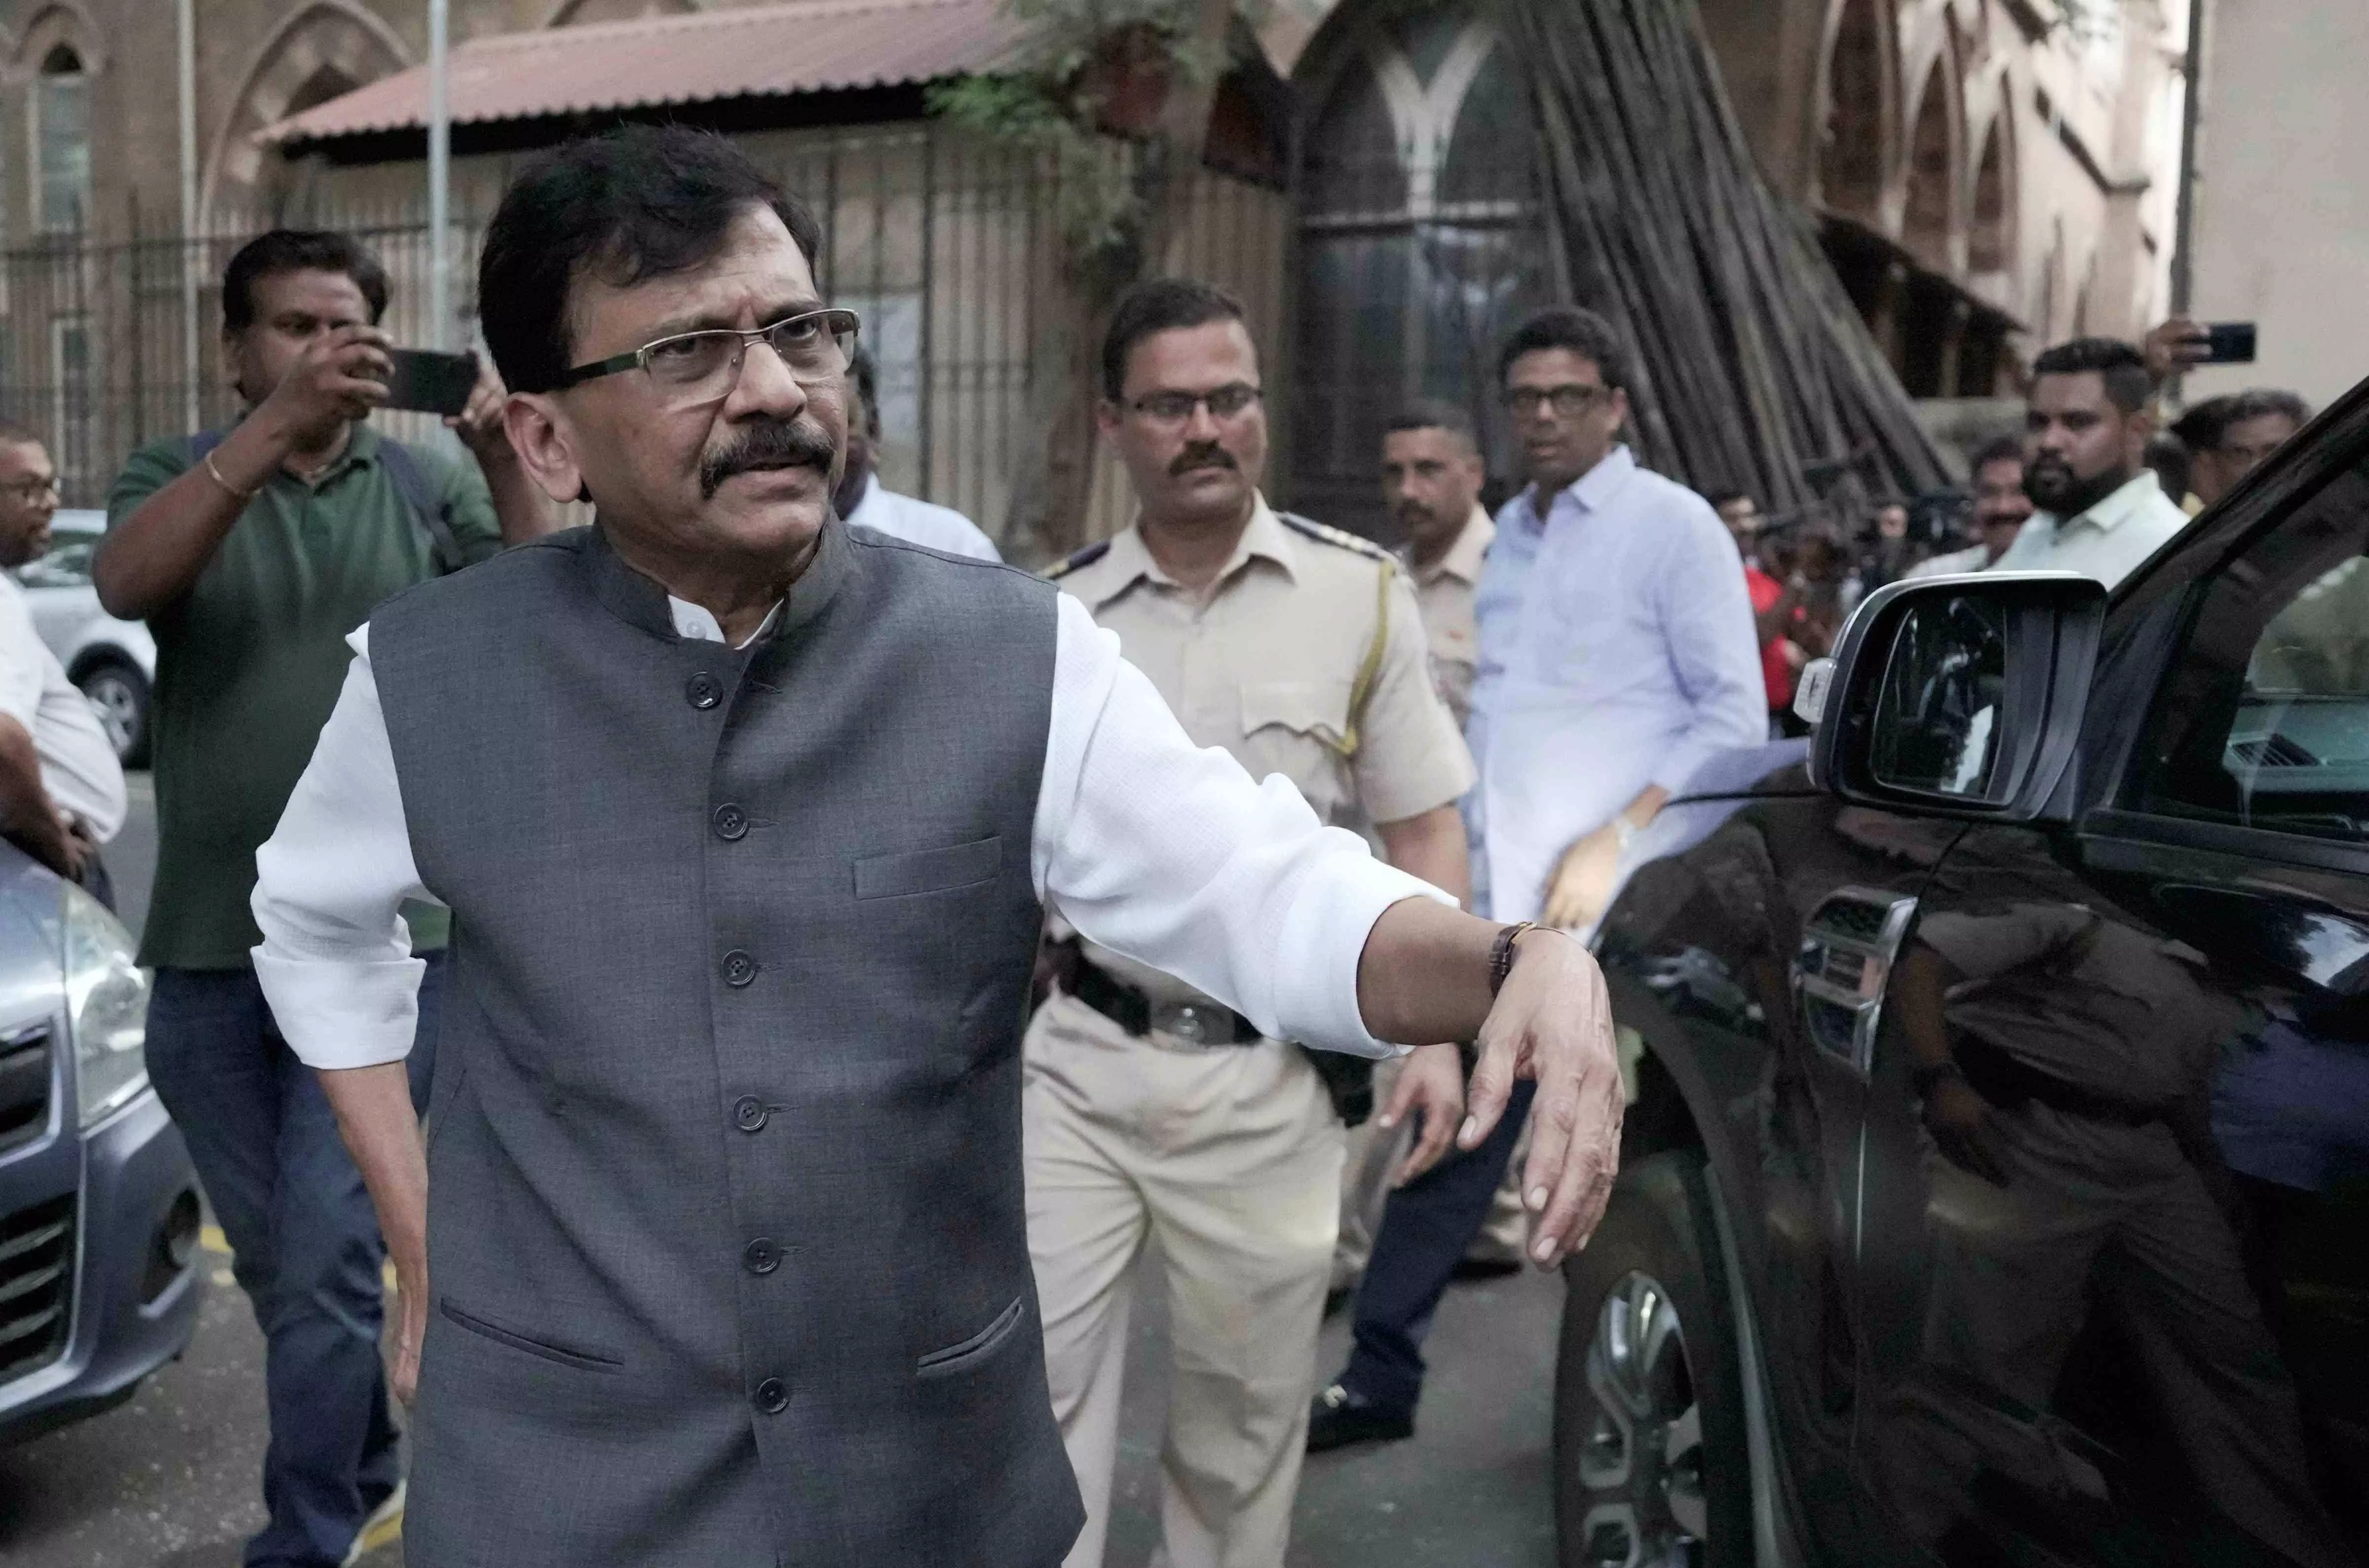 Rs 2,000 cr deal to purchase Shiv Sena name and symbol, claims Sanjay Raut; Shinde camp dismisses allegation